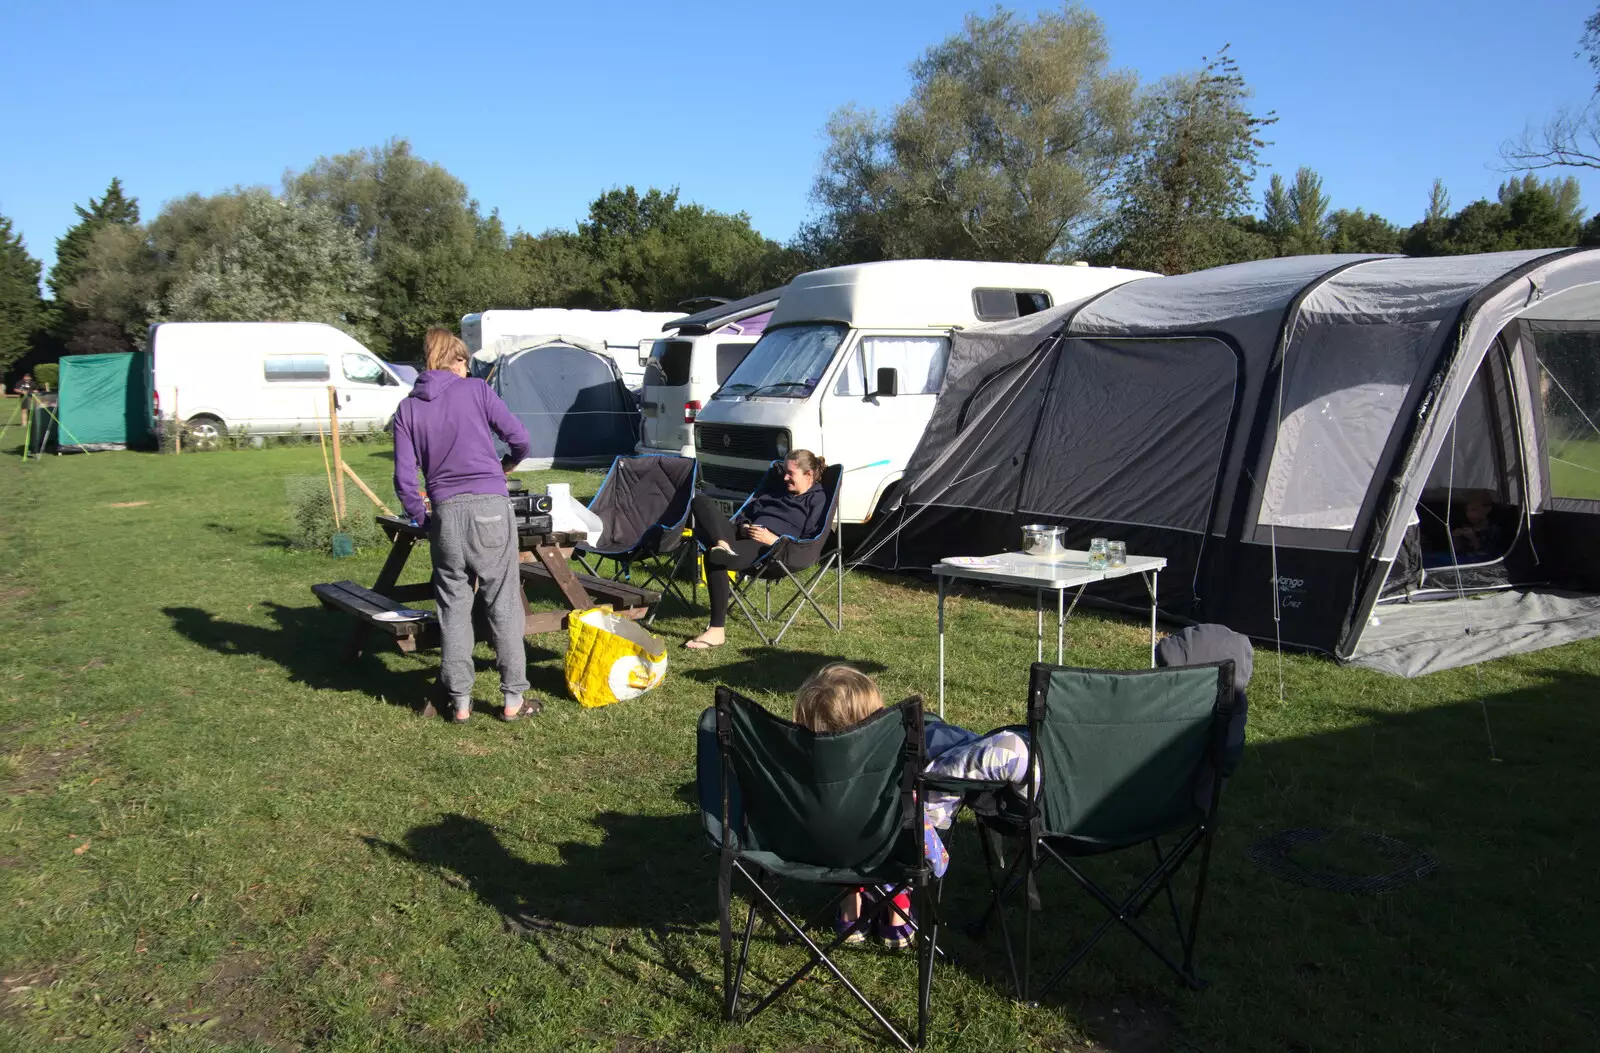 Hanging around the camp site, from Camping at Three Rivers, Geldeston, Norfolk - 5th September 2020